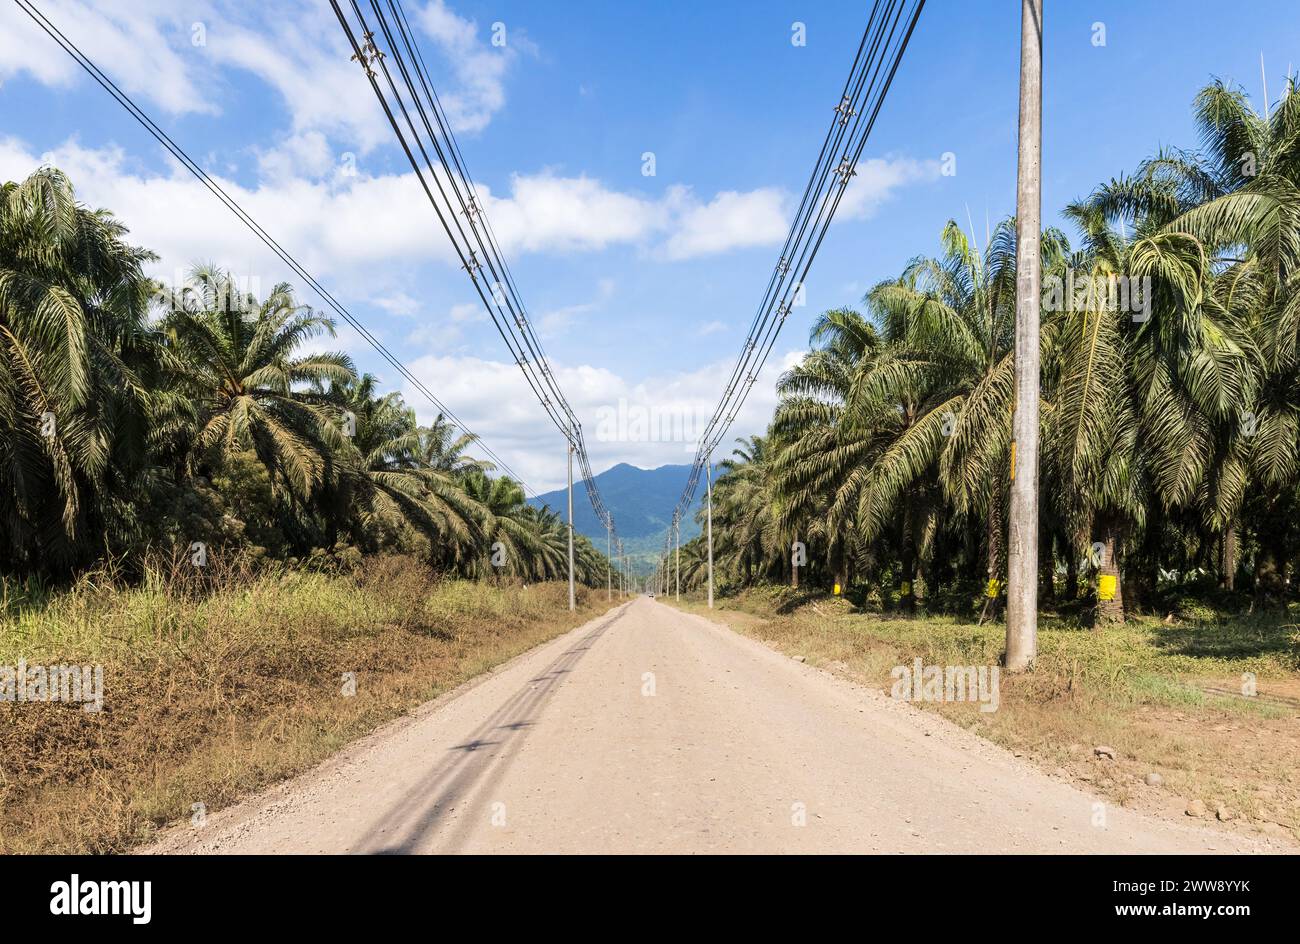 Dirt road in Costa Rica with utility poles and surrounded by palm tree farms Stock Photo